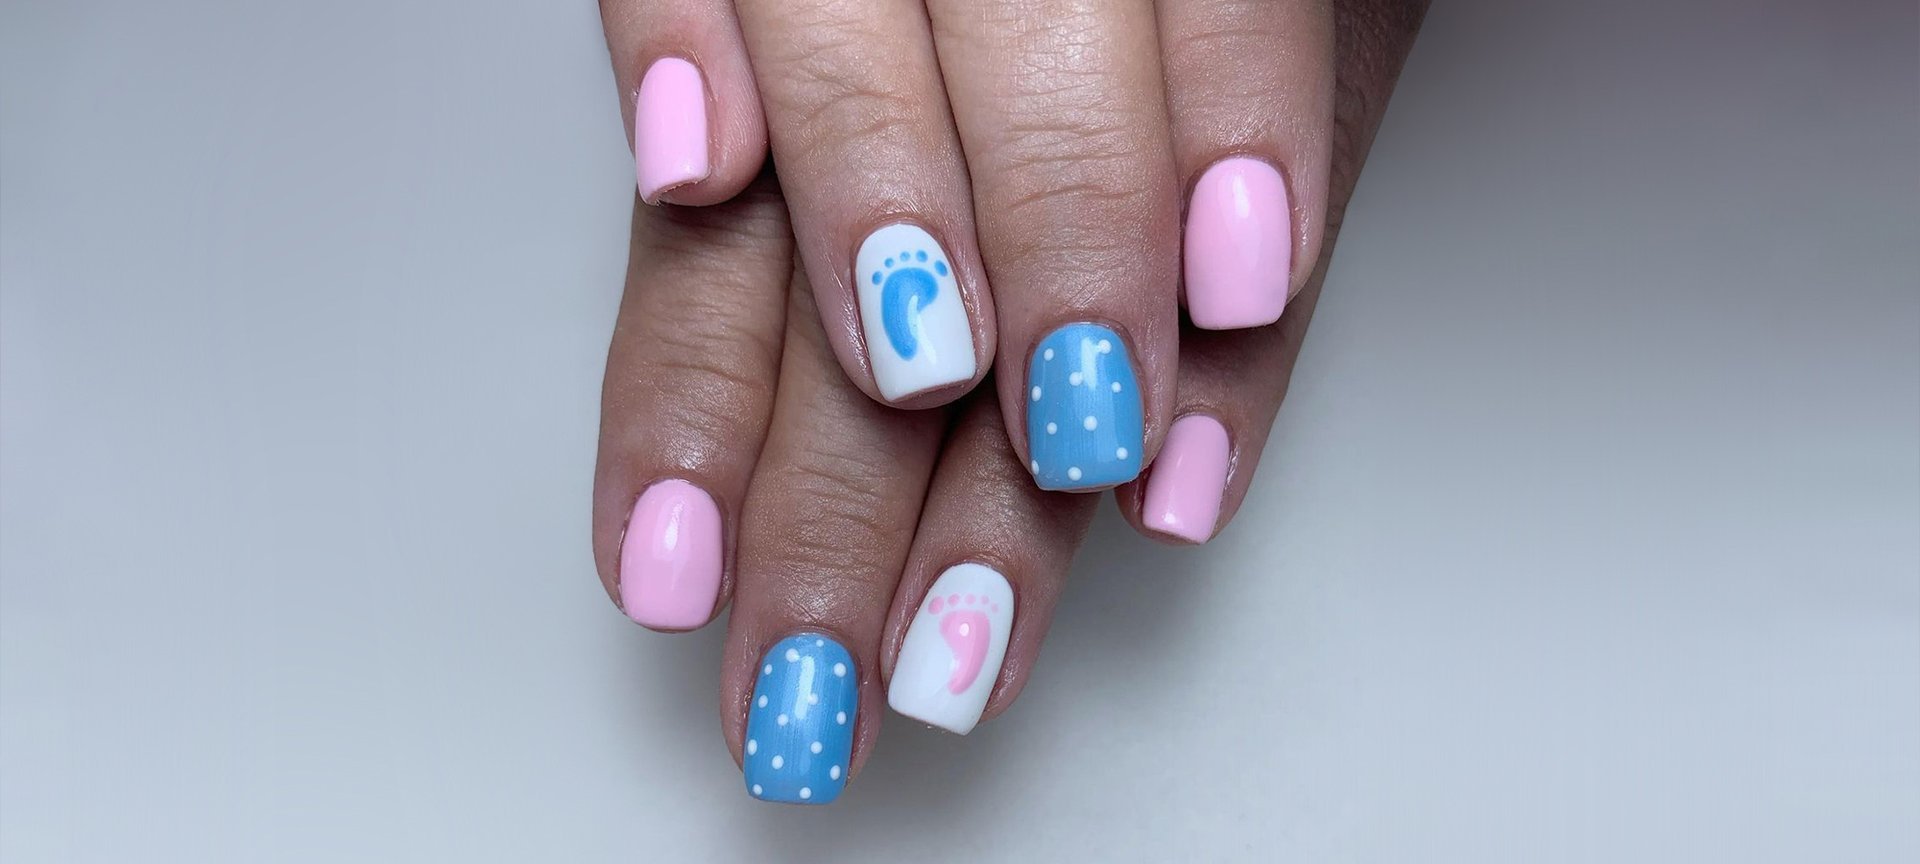 10 Gender Reveal Nail Ideas To Try - L’Oreal Paris